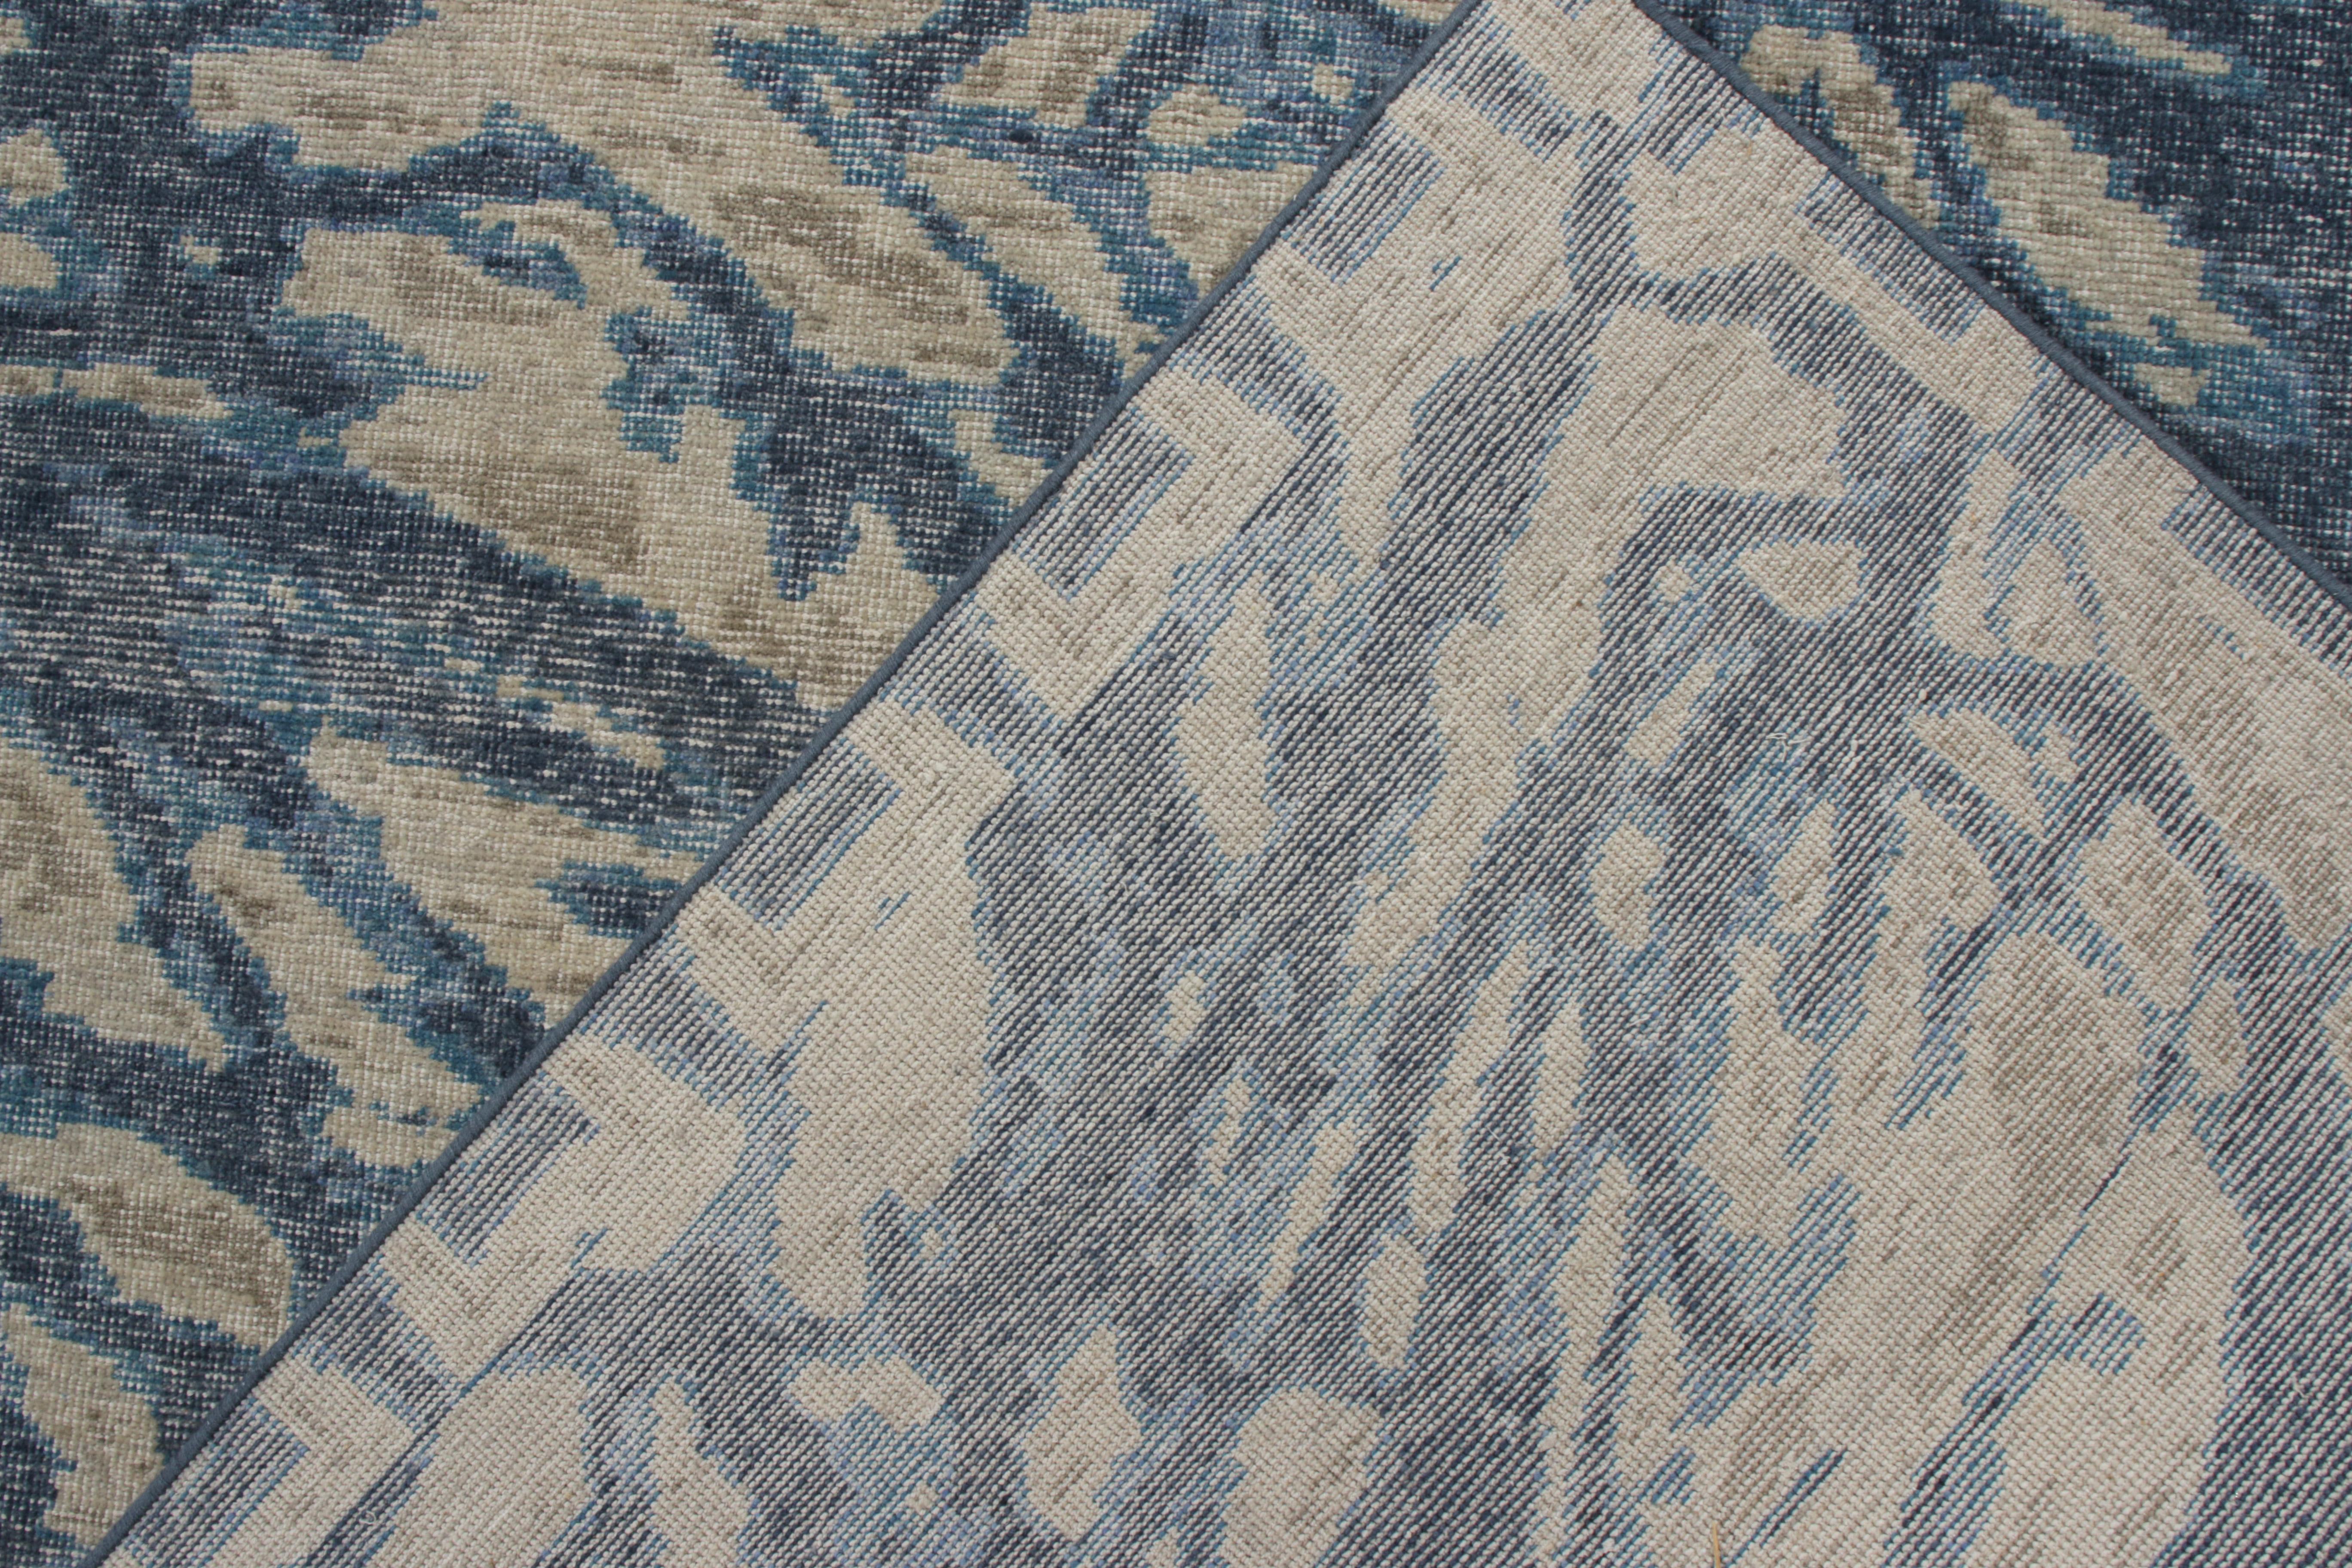 Hand-Knotted Rug & Kilim’s Distressed Style Abstract Rug in Beige, Blue Geometric Pattern For Sale